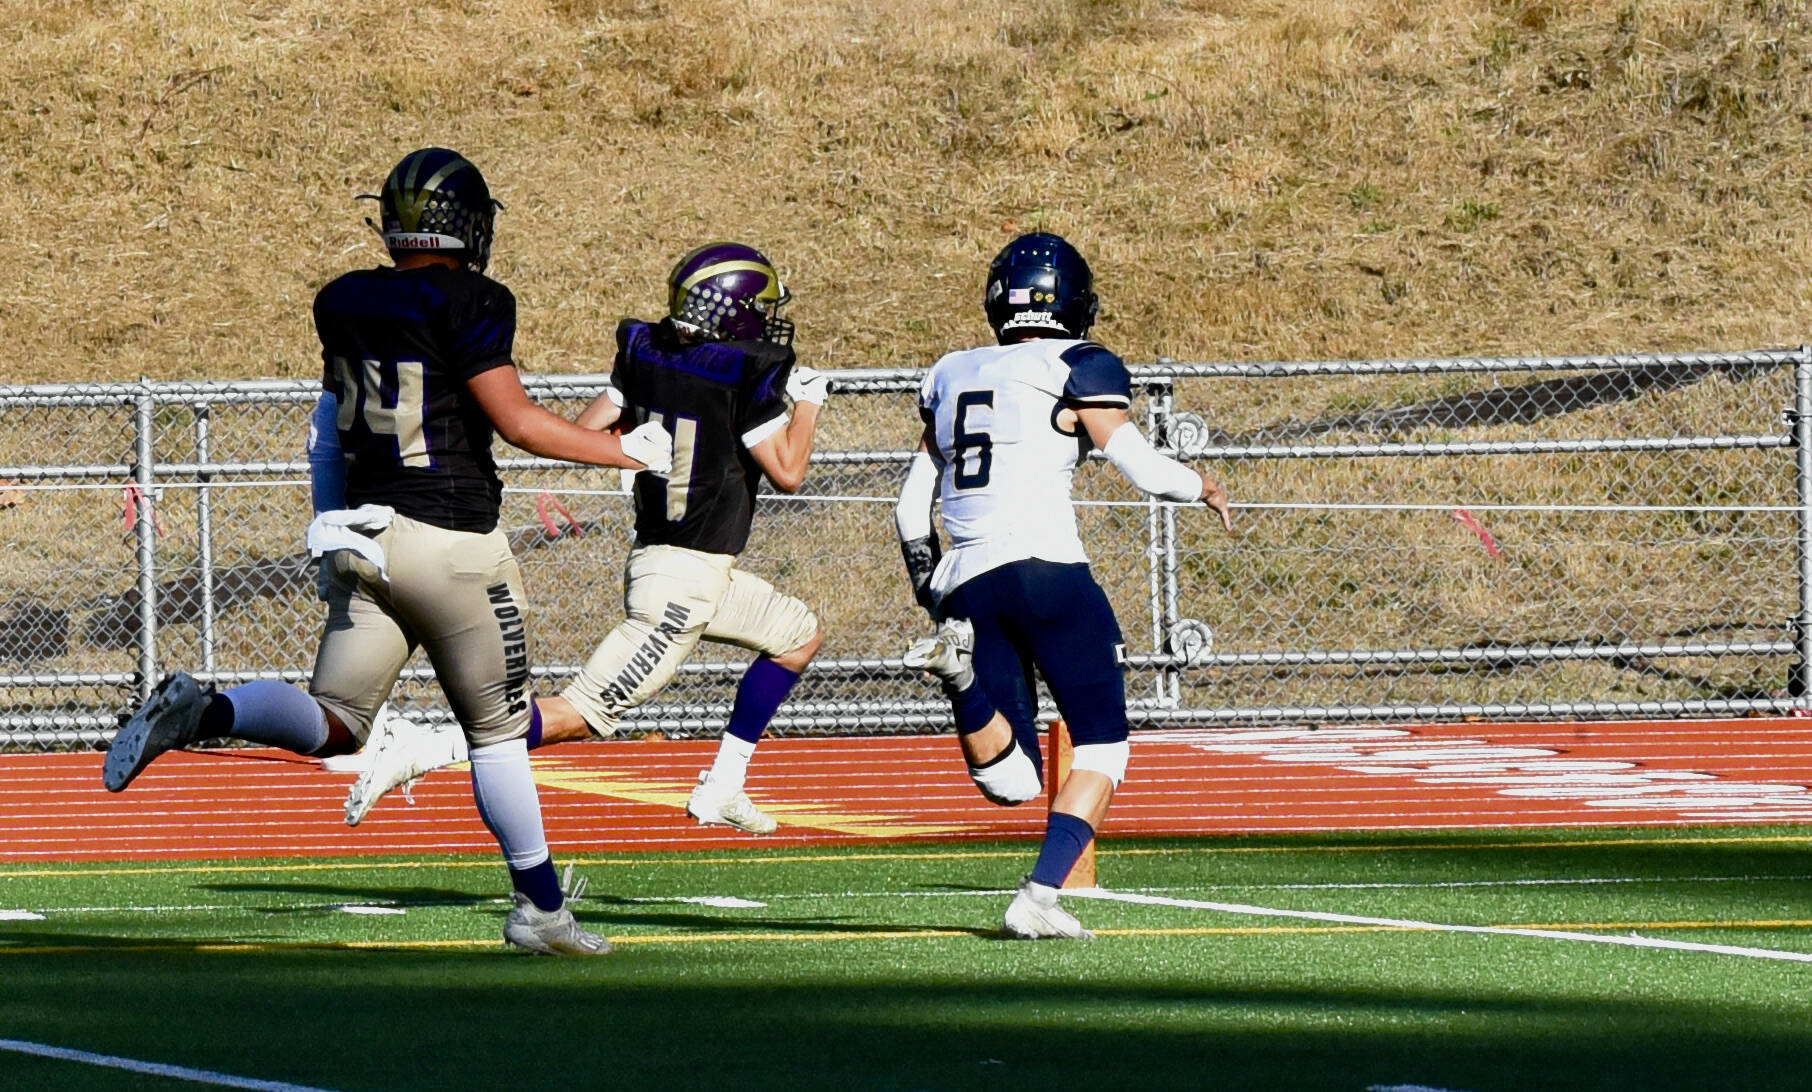 Wolverine Connor Haines, #14, races the baseline to score the first touchdown. (John Stimpson photo)